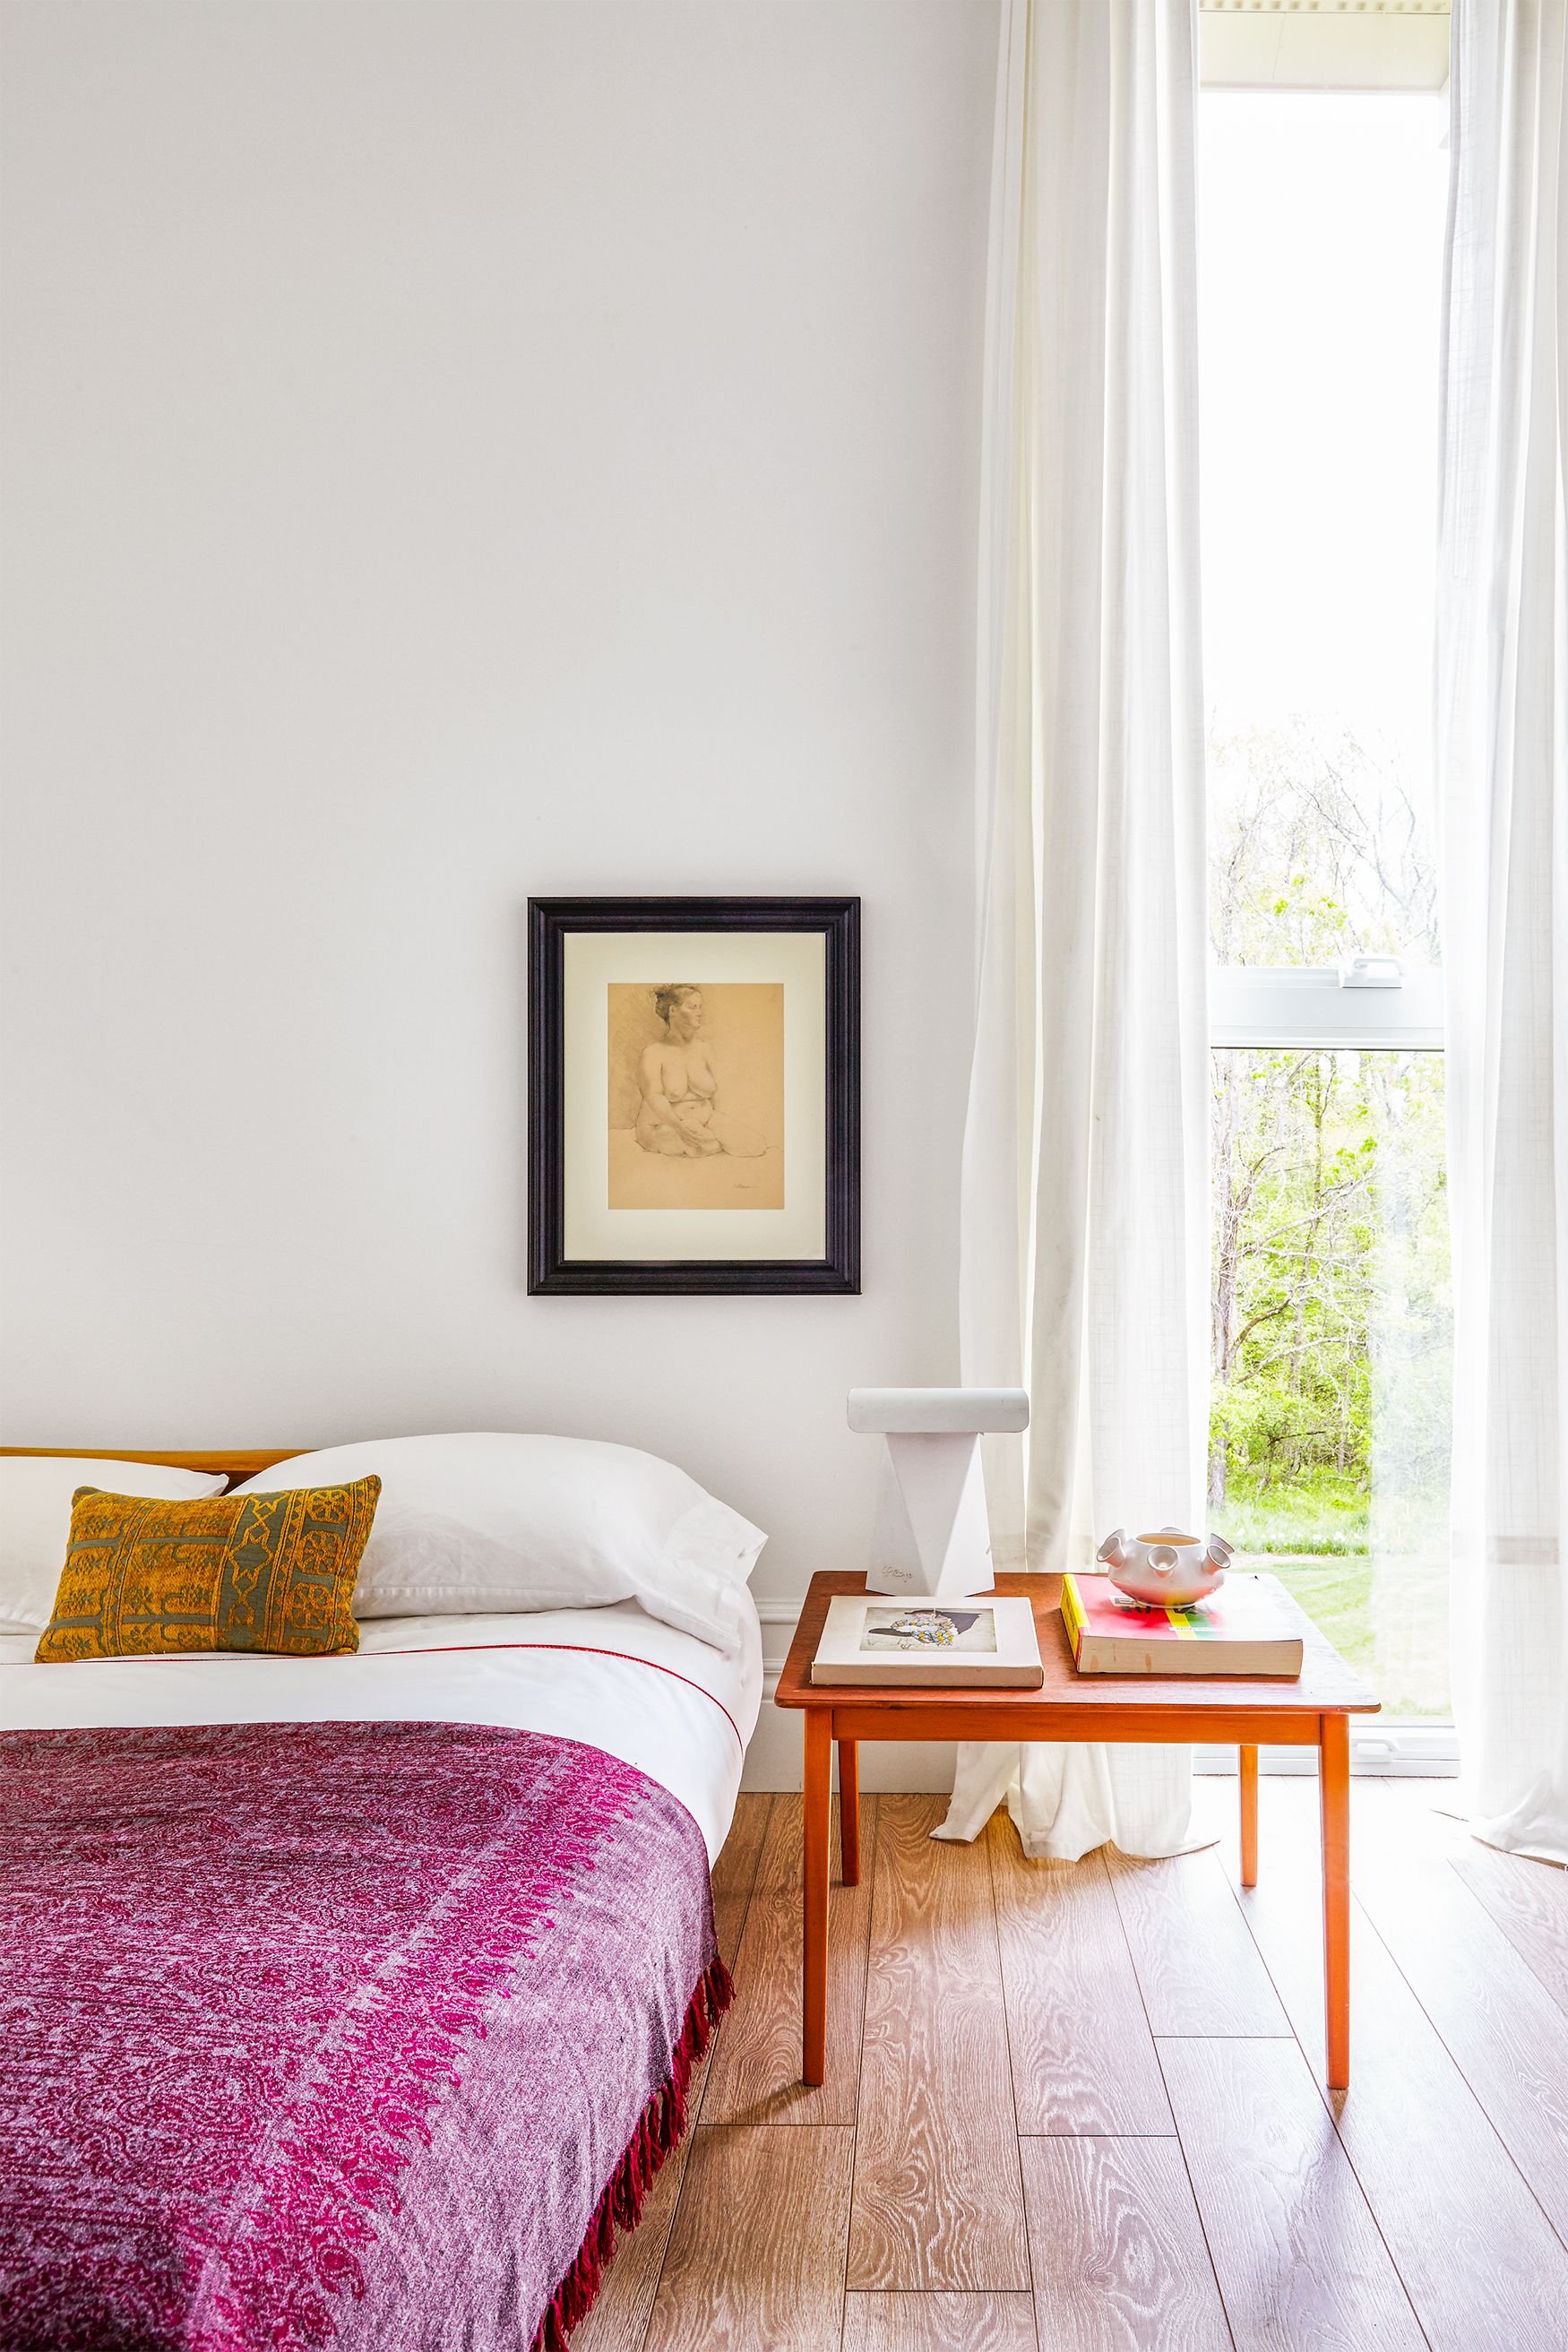 The 11 Best White Paint Colors for a Neutral Space